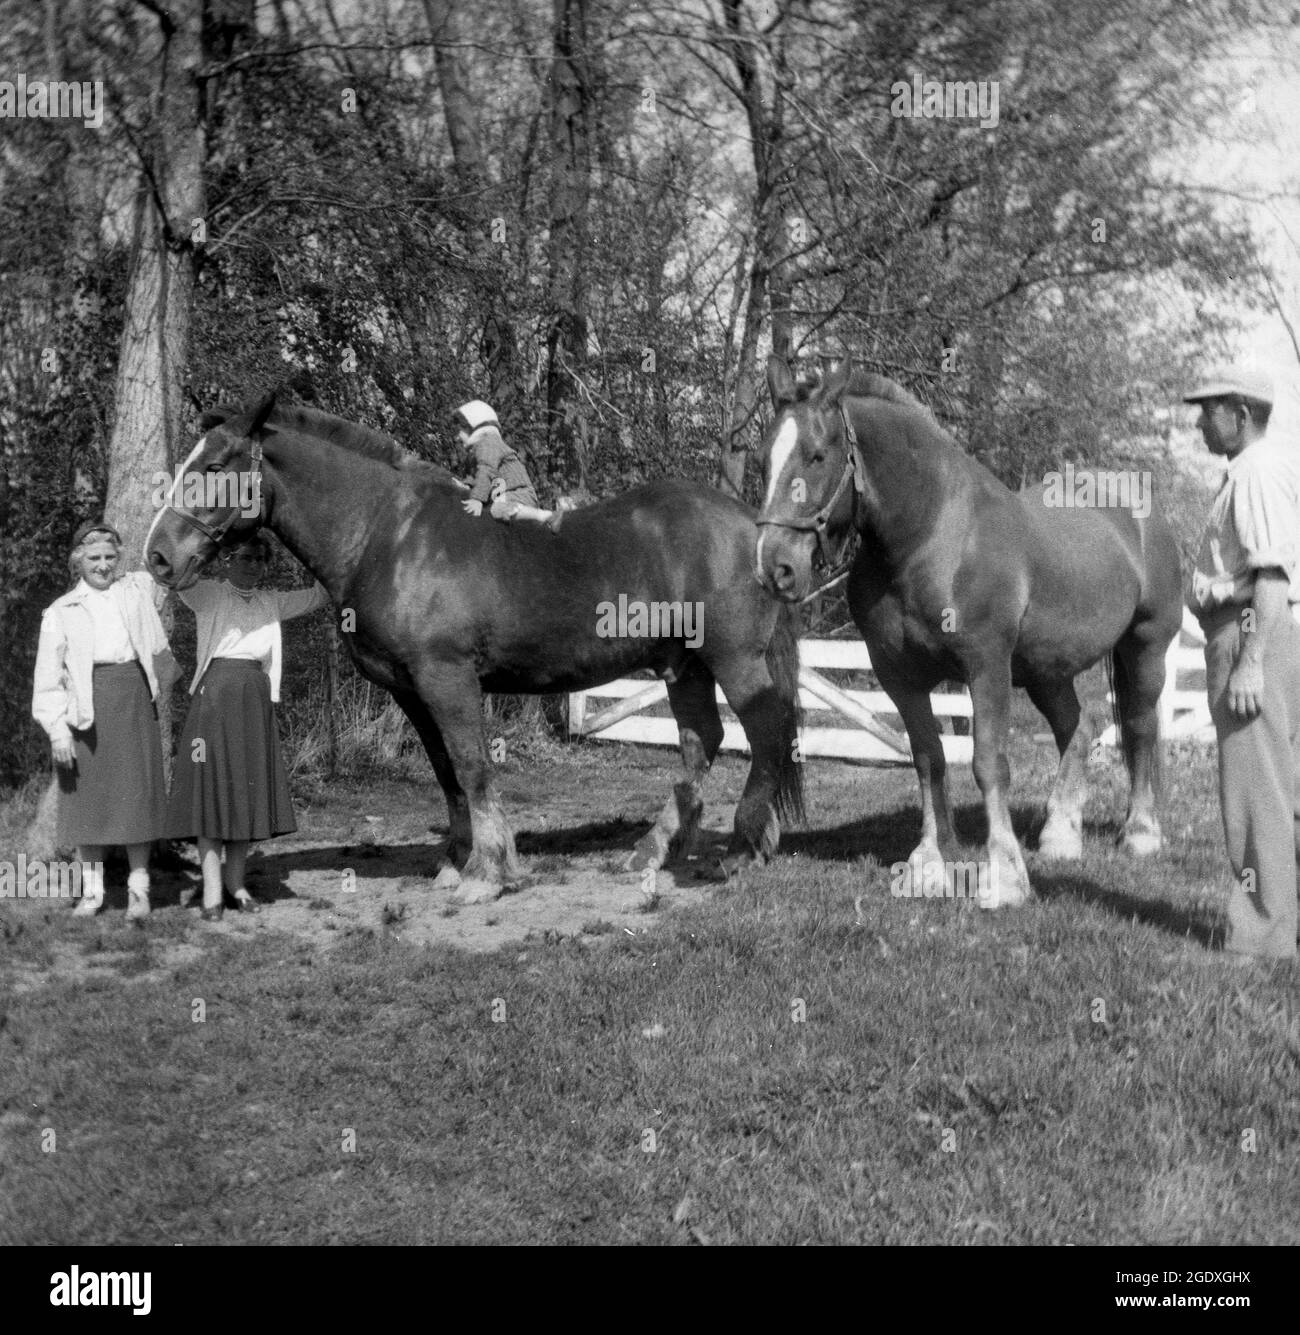 1960s, historical, outside in a field, a small child sitting on top of a very large draft horse, with mother, grandmother and farmer standing by, Des Monies, USA. Although it may seem strange to see such a small child on such a large animal, draft horses as they are known are patient and have a docile temperament. Draft horses are the largest of horse breeds and are animals bred for heavy work, such as plowing, logging or pulling loads, tasks essential to people before the industrial revolution and the invention of the internal combustion engine and steam engines and tractors. Stock Photo